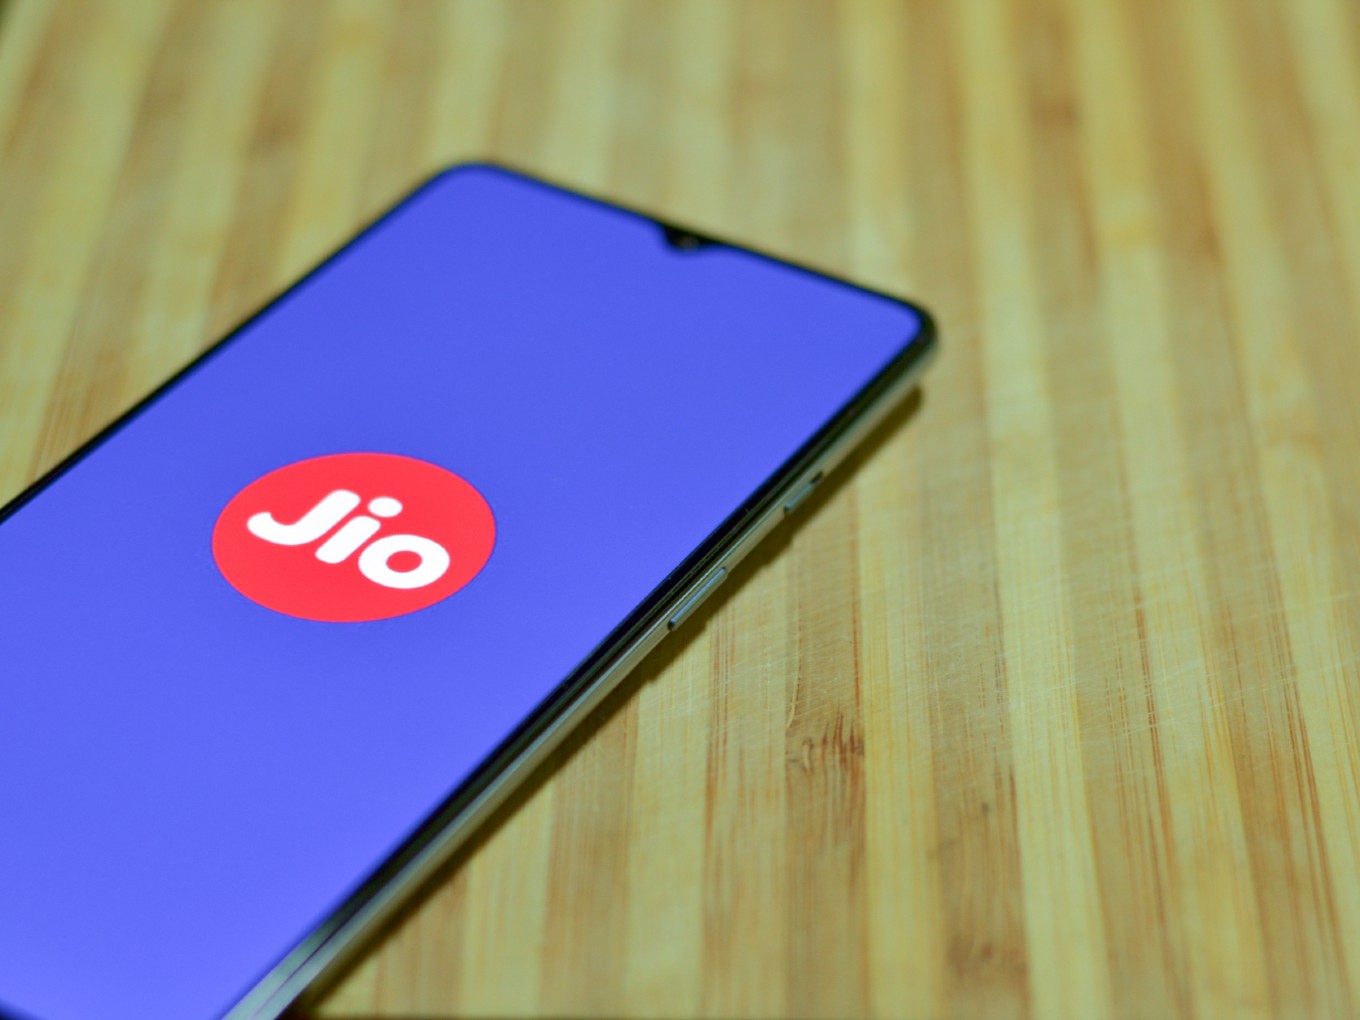 Saudi Arabia’s Public Investment Fund May Invest In Reliance Jio